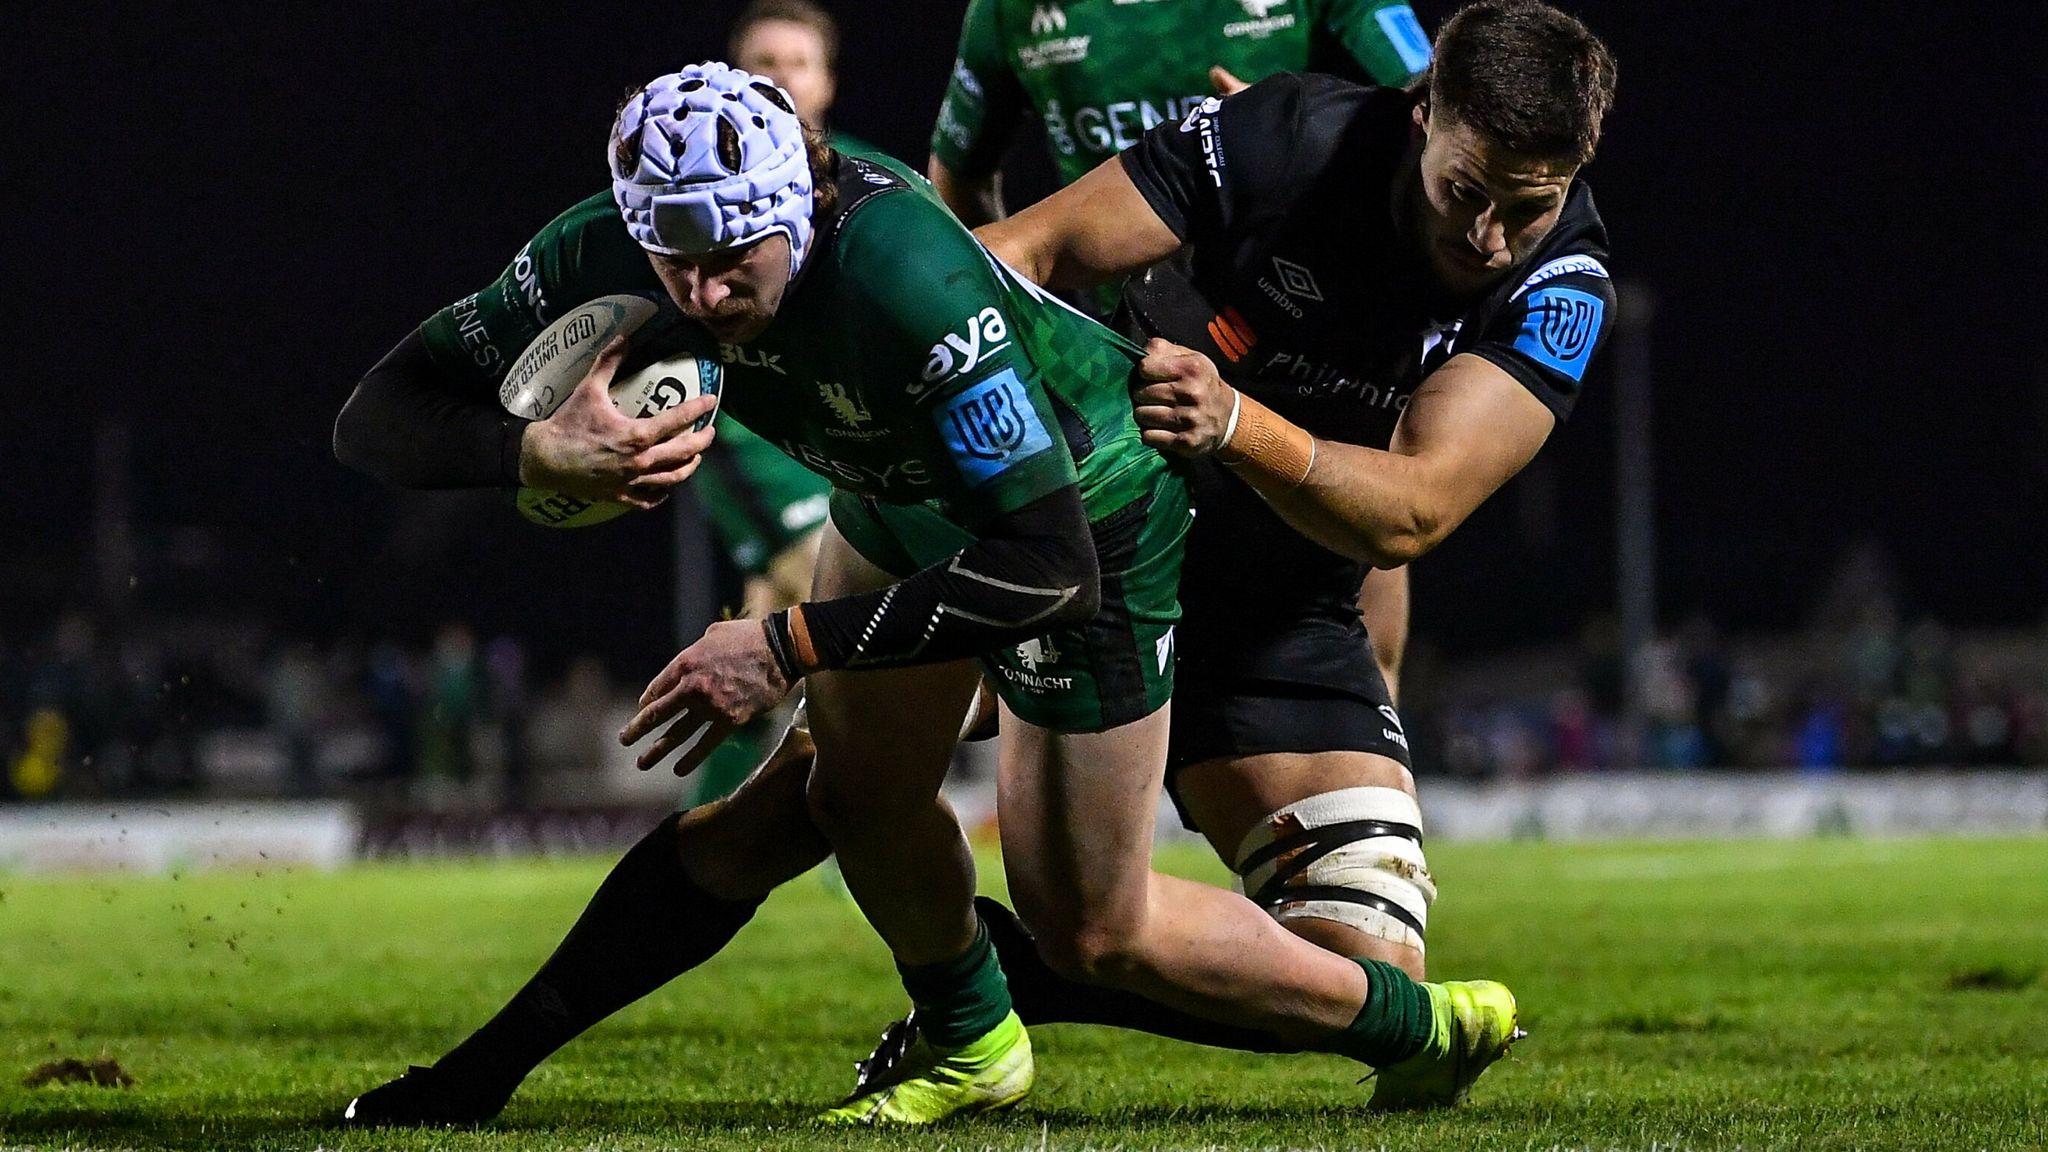 United Rugby Championship Connacht storm past Ospreys with 46-18 win Rugby Union News Sky Sports